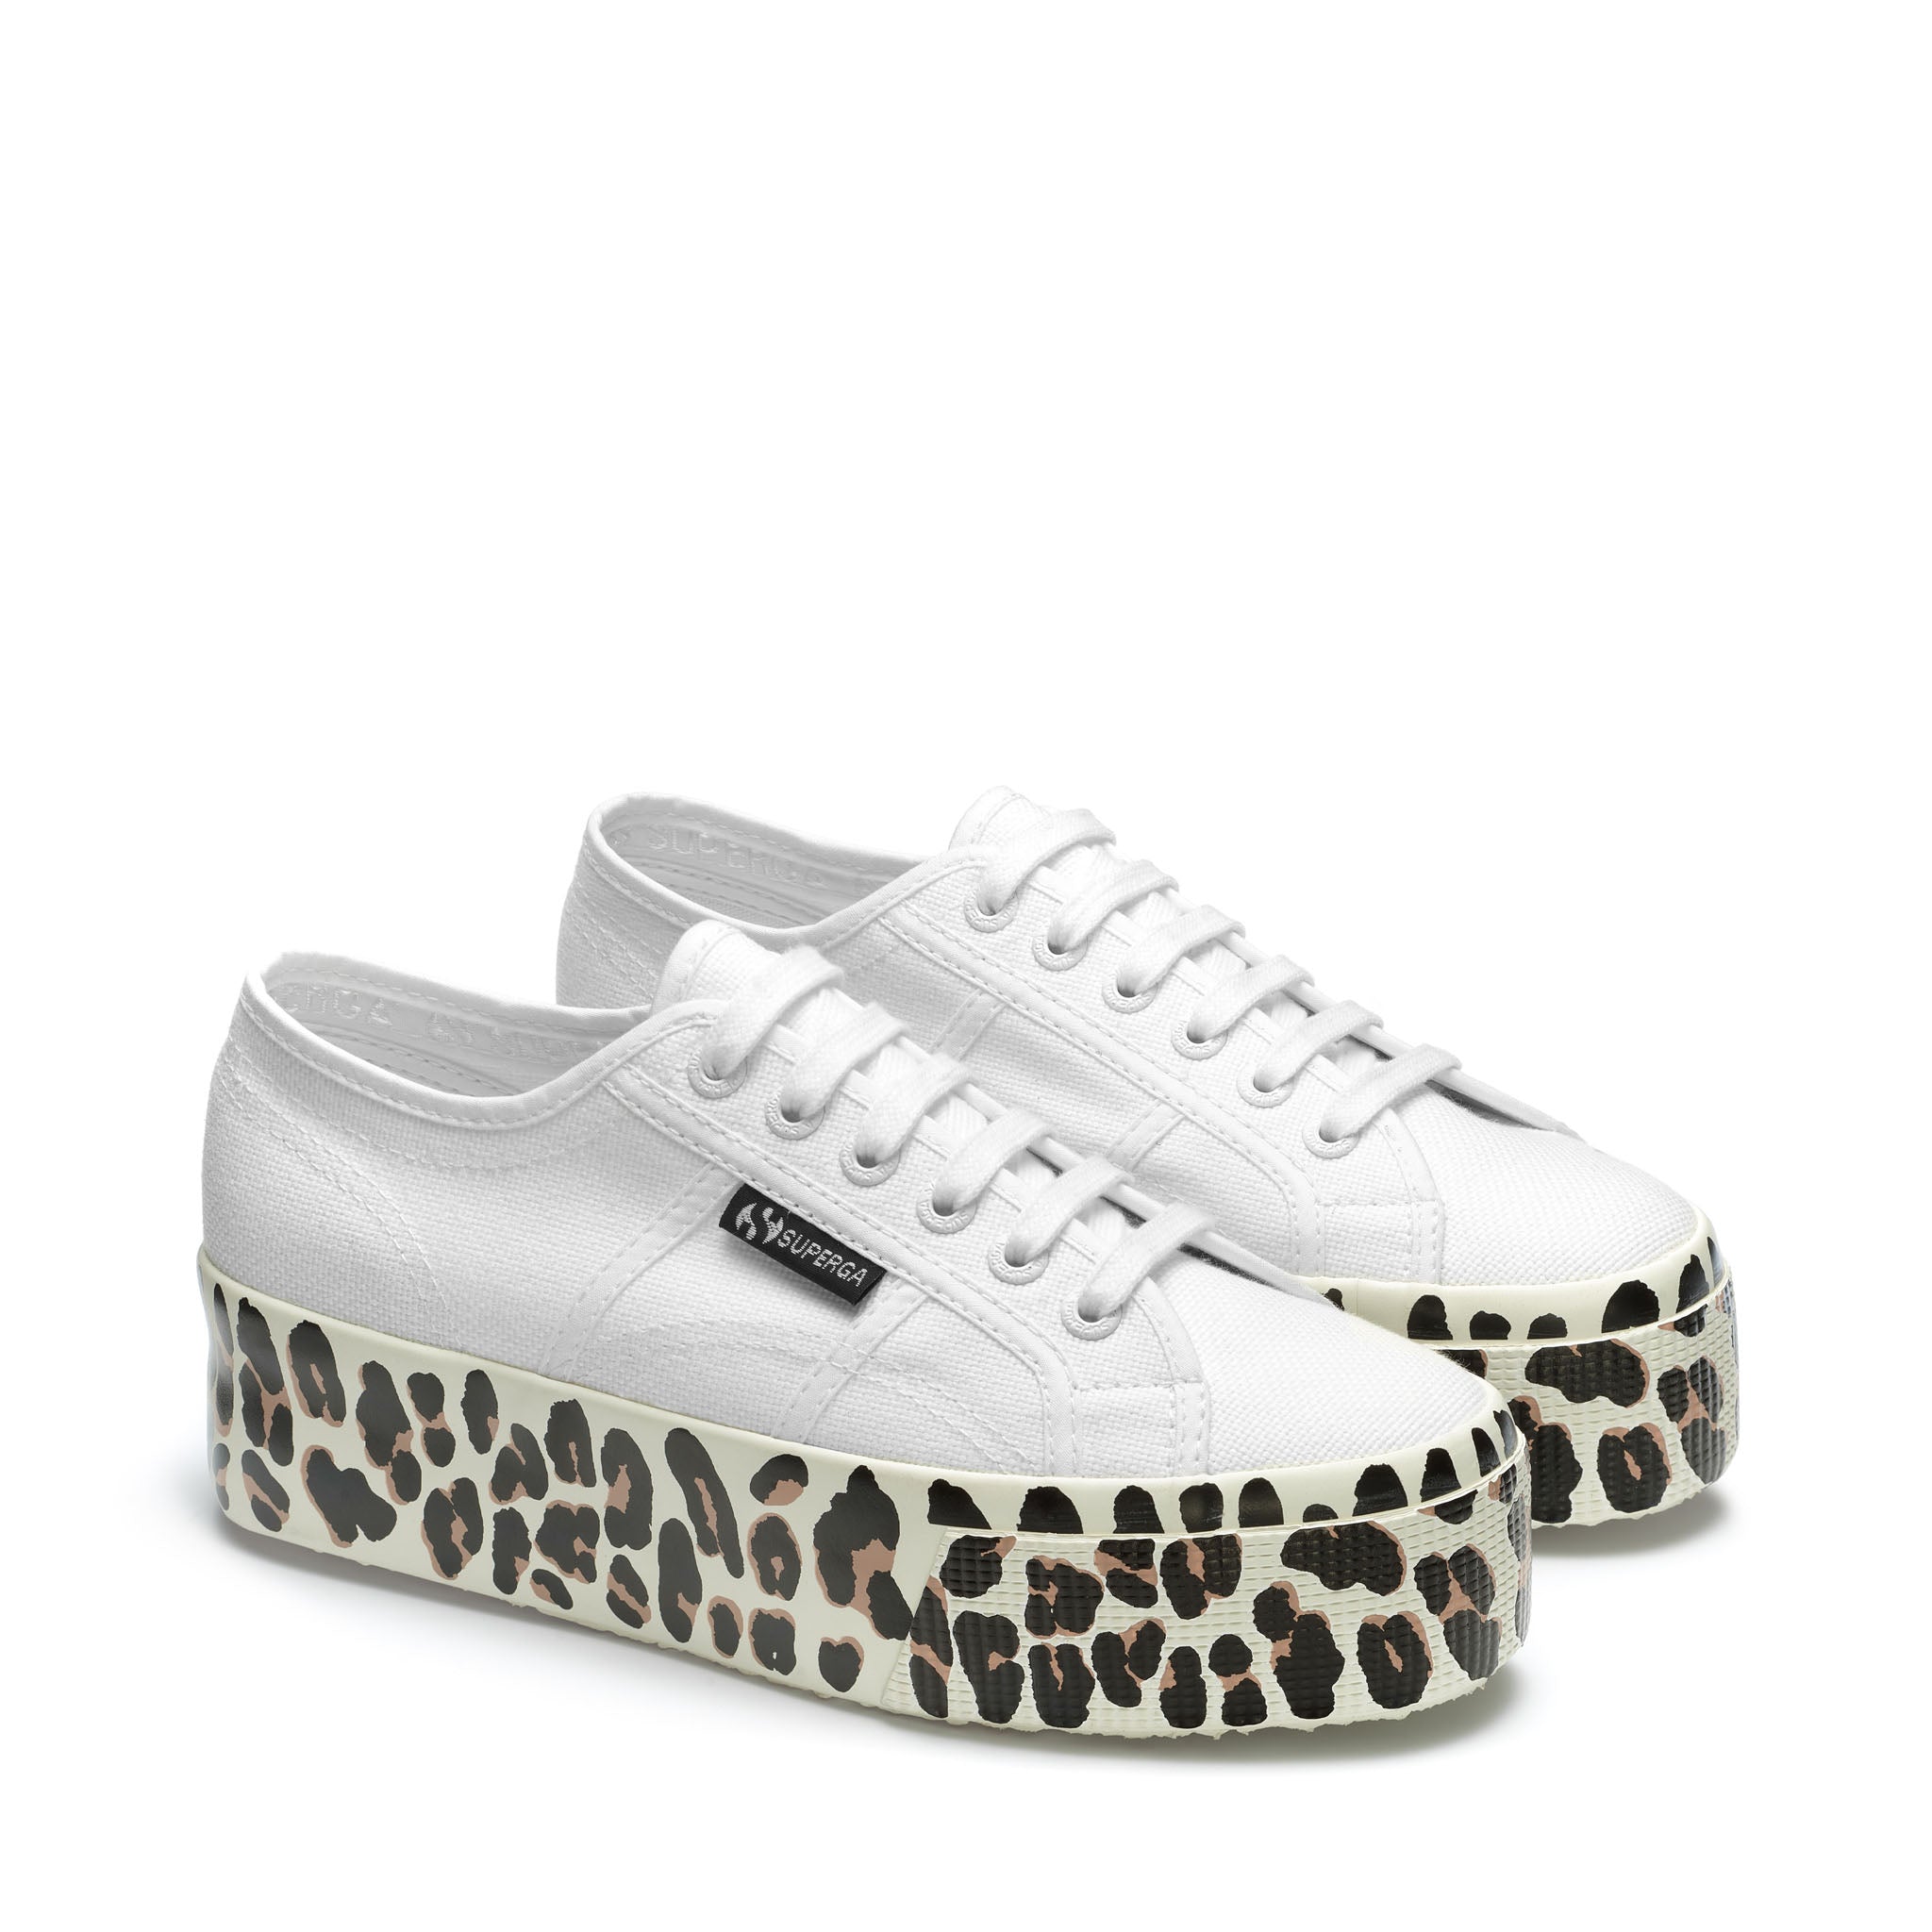 Superga 2790 Light Leopard Foxing Print Sneakers - White. Front view.